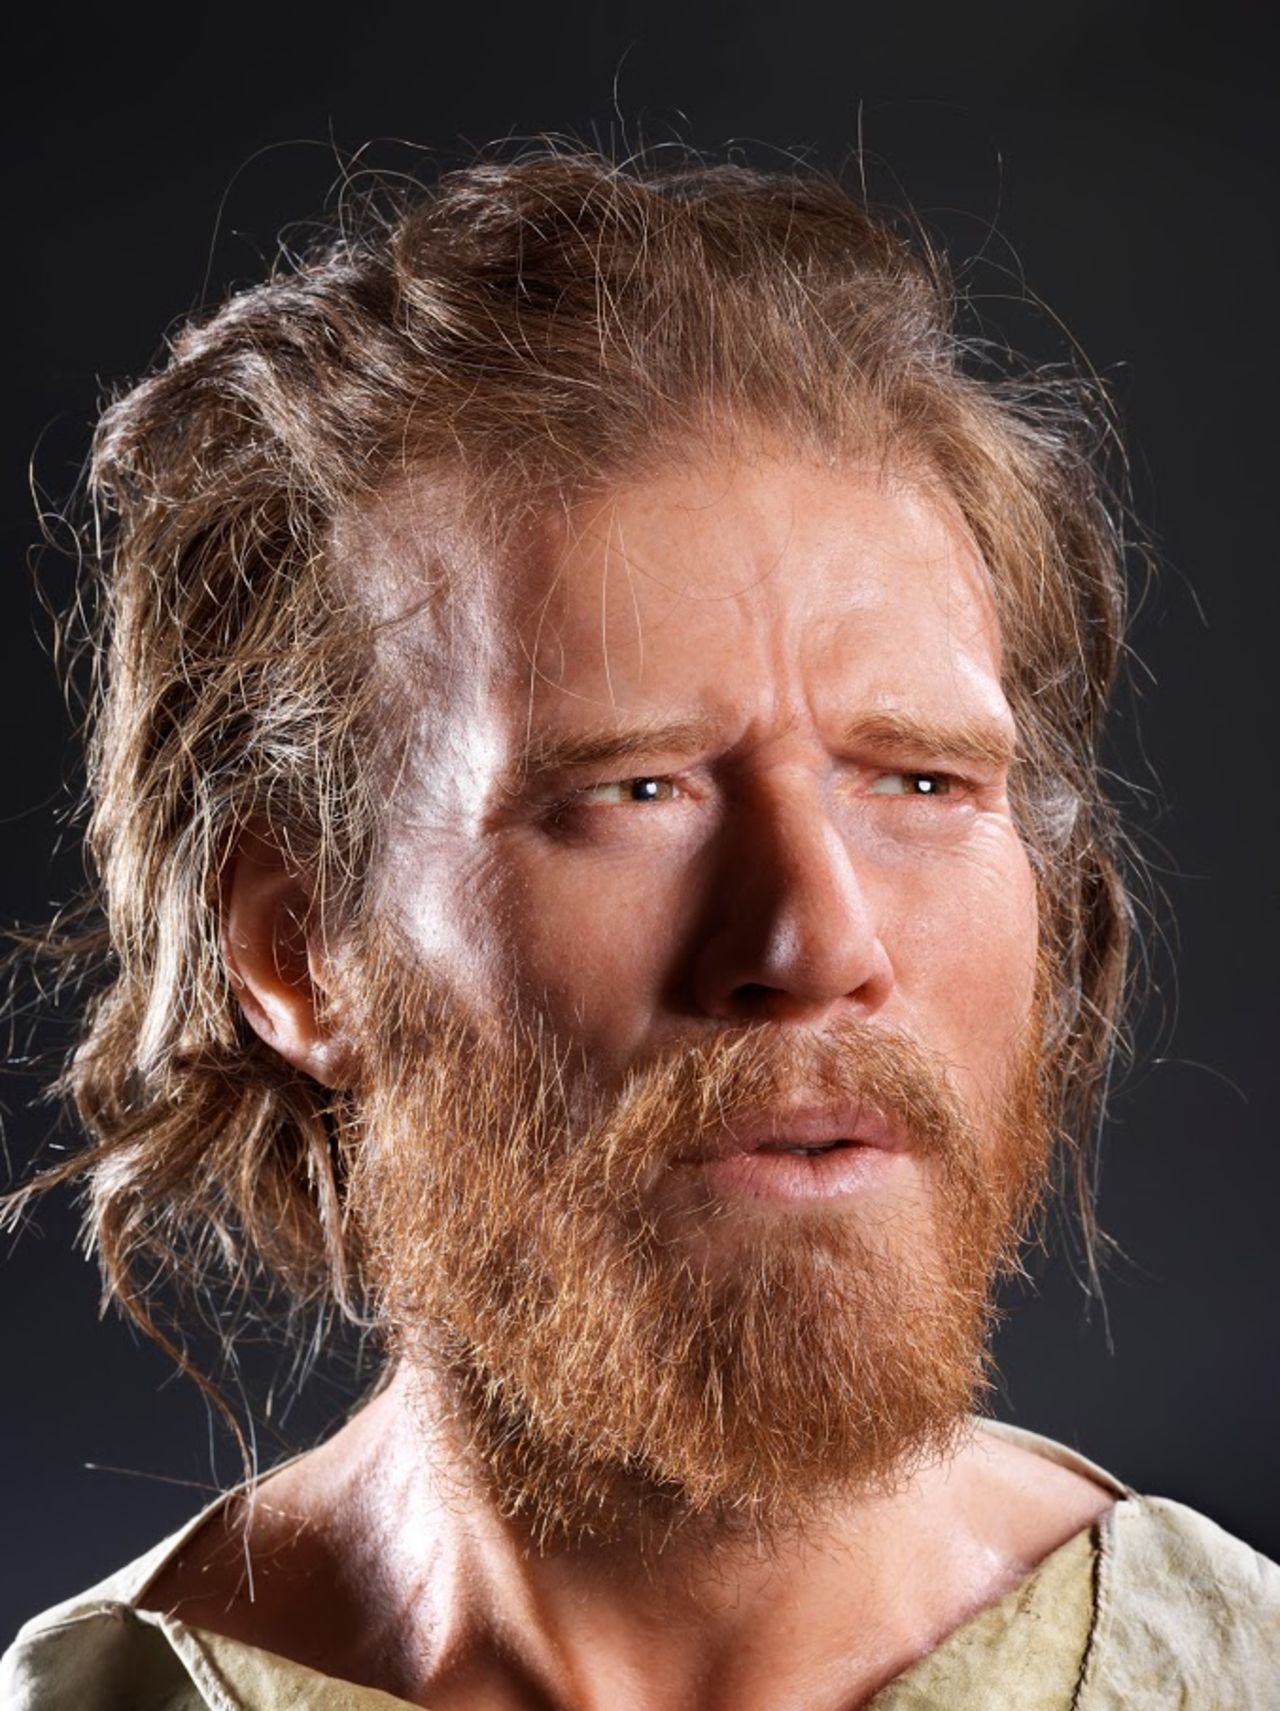 One of the visitor center's prime attractions is the reconstructed head of a Neolithic man's skeleton found nearby.